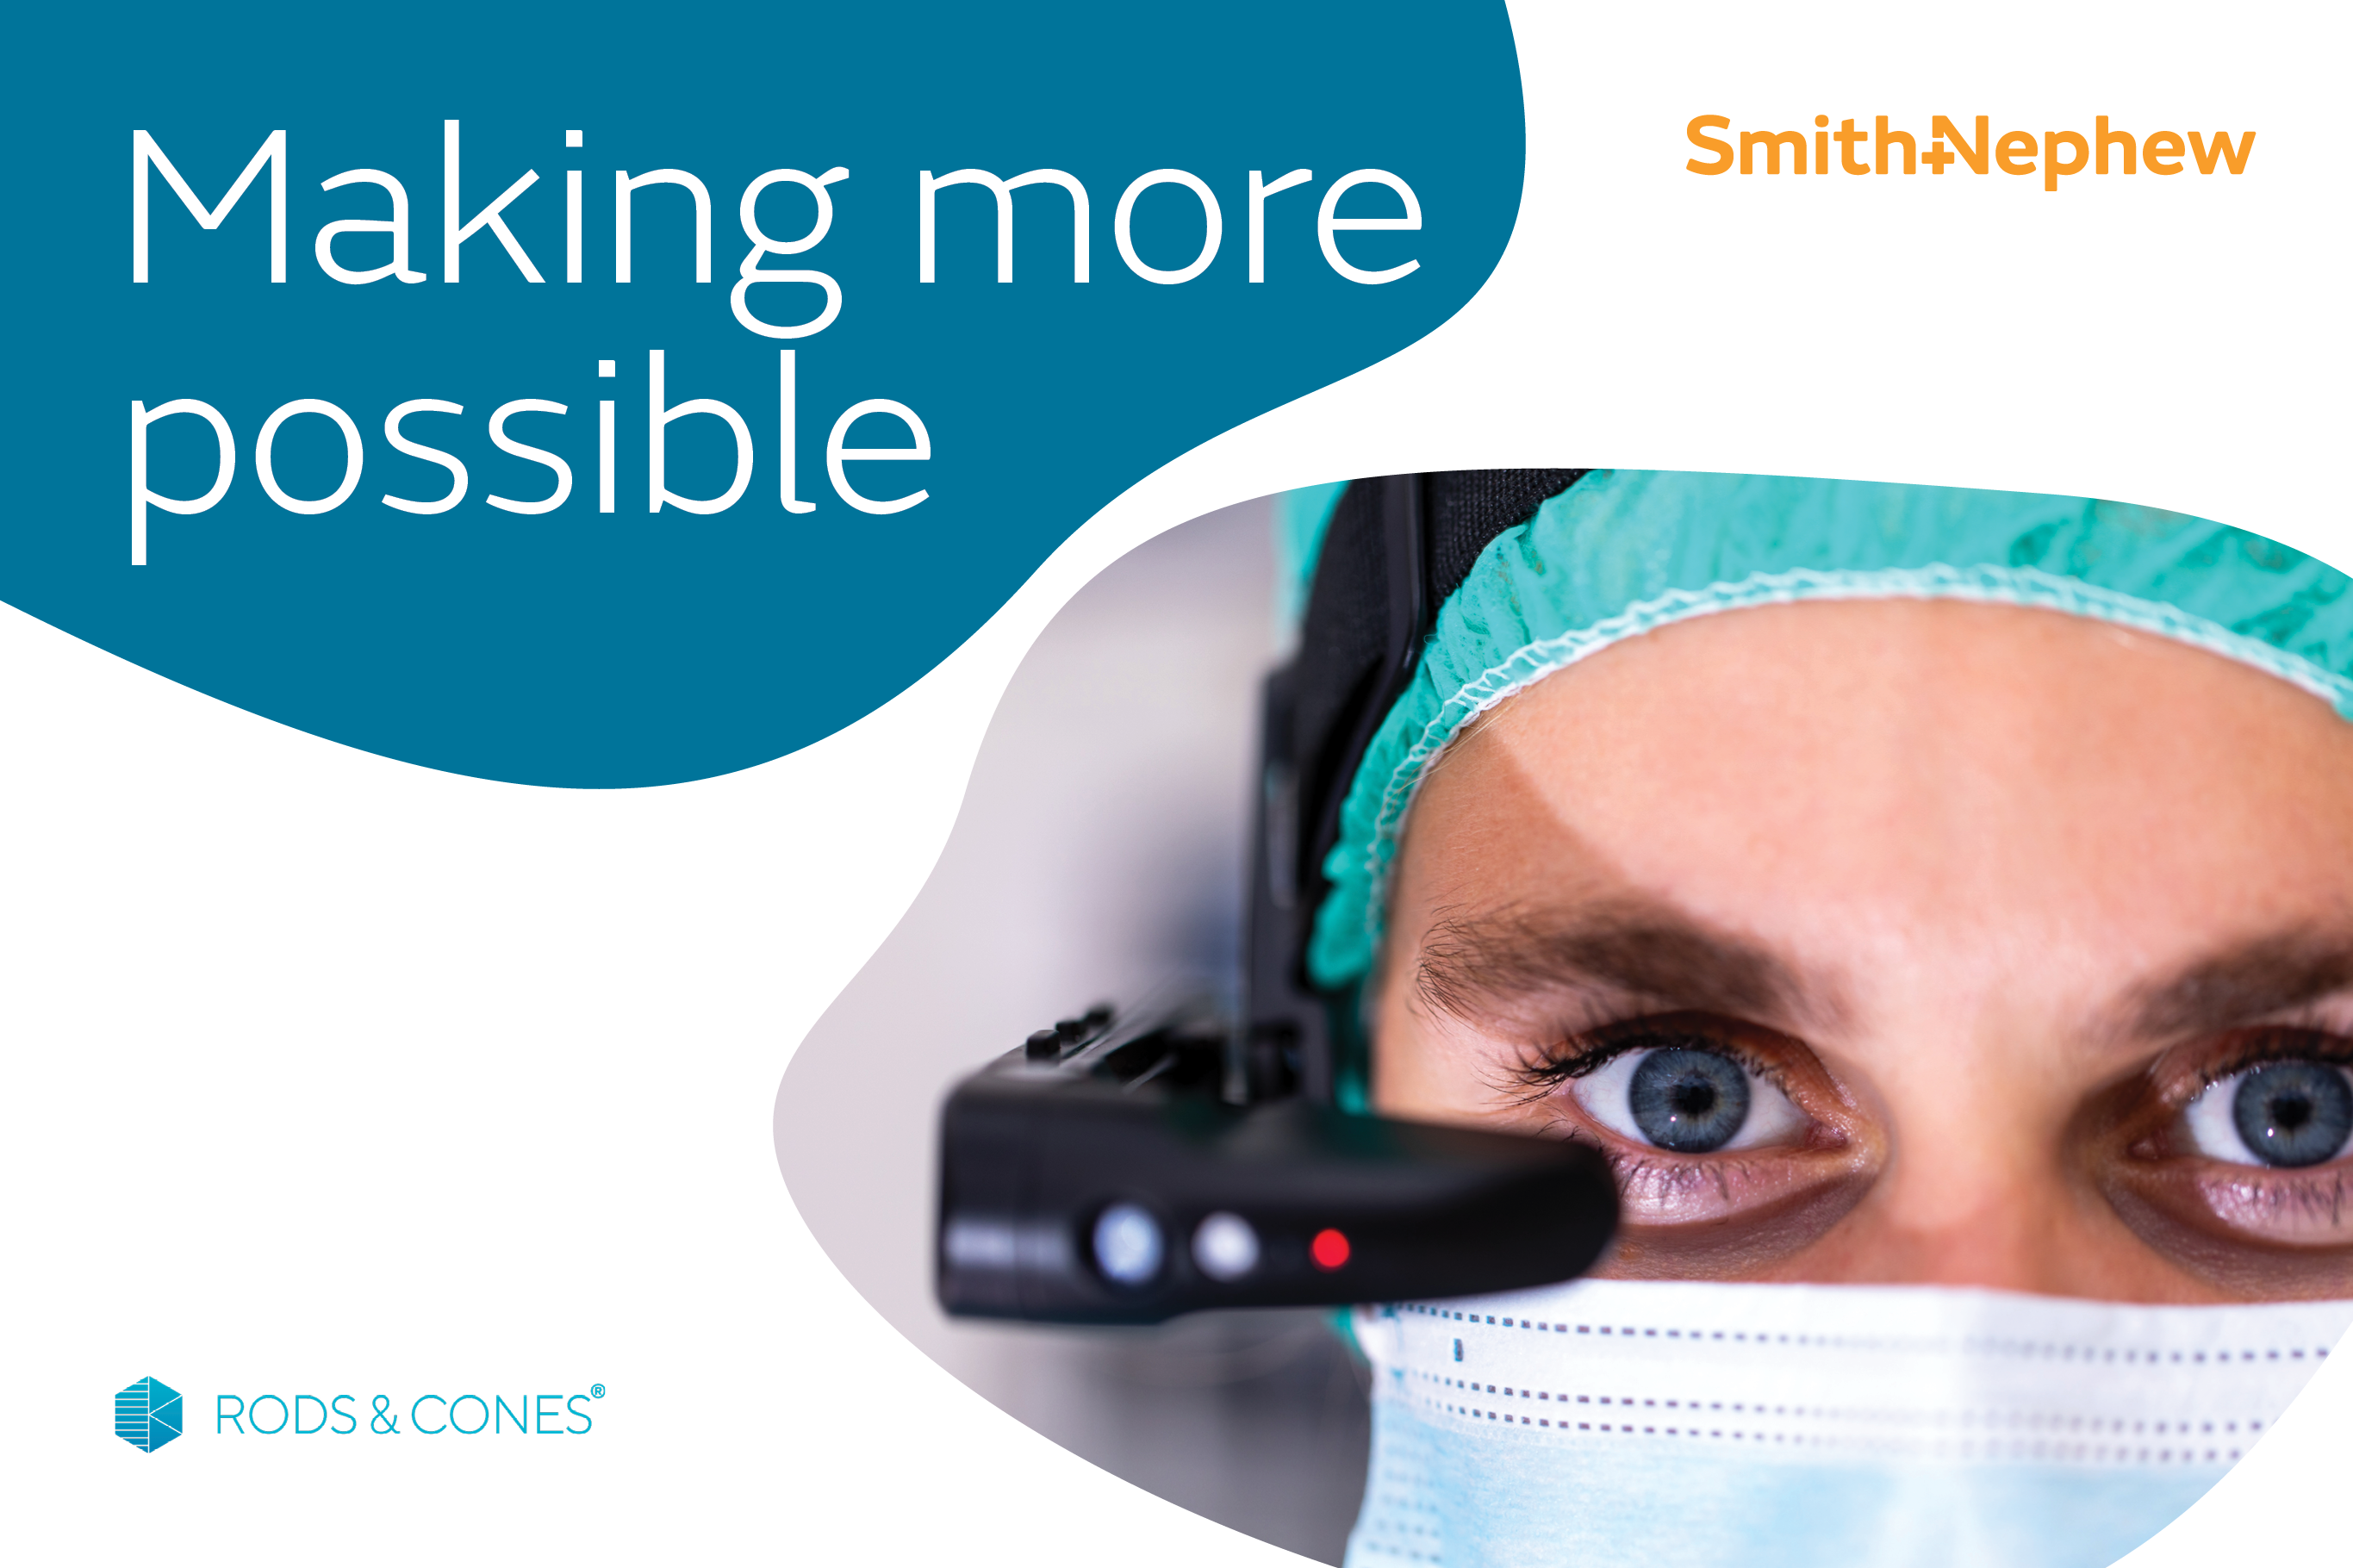 Smith+Nephew introduces smart glasses into the operating room to enable remote technical support for UK surgeons during procedures